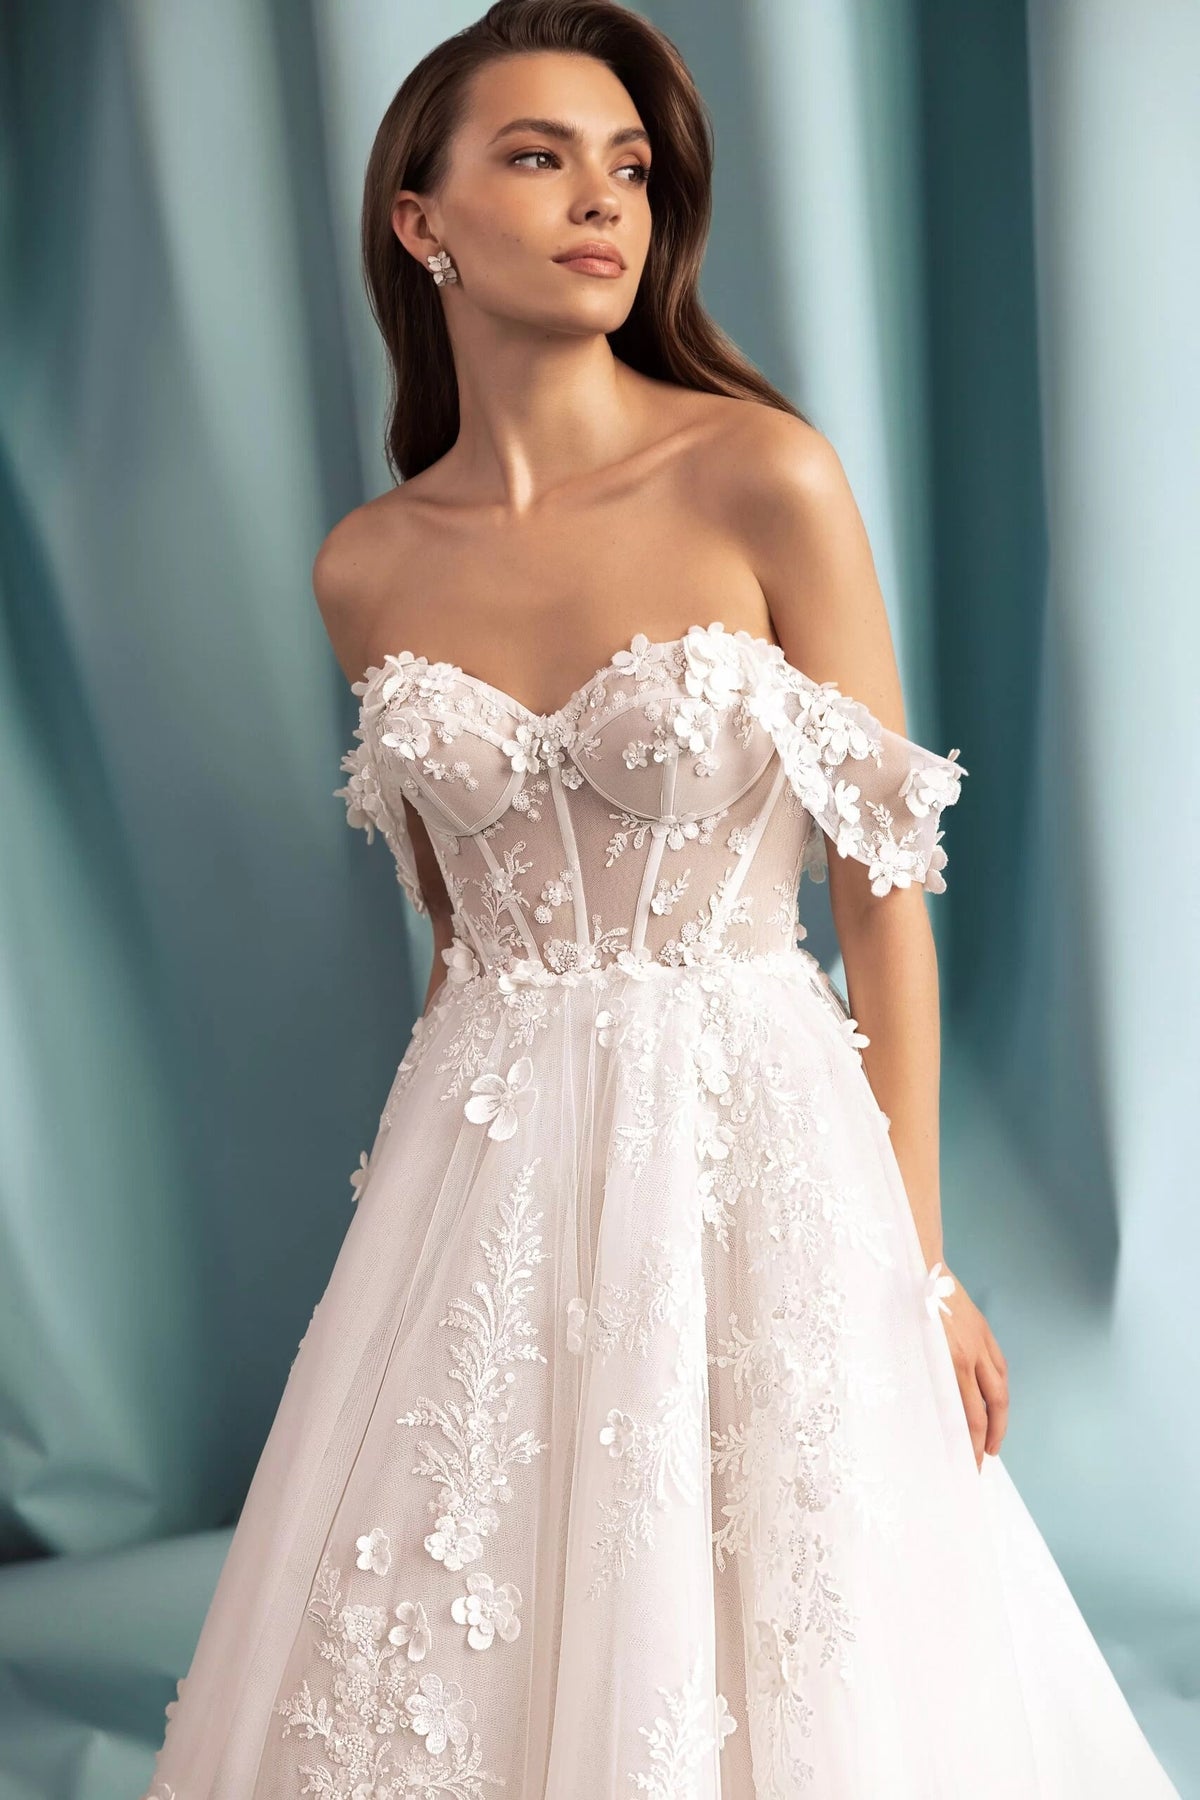 Luxury Aline Wedding Dress Floral Off The Shoulder Straps Open Back Sweetheart Neckline Bridal Gown 3D Flowers with Train Corset Back